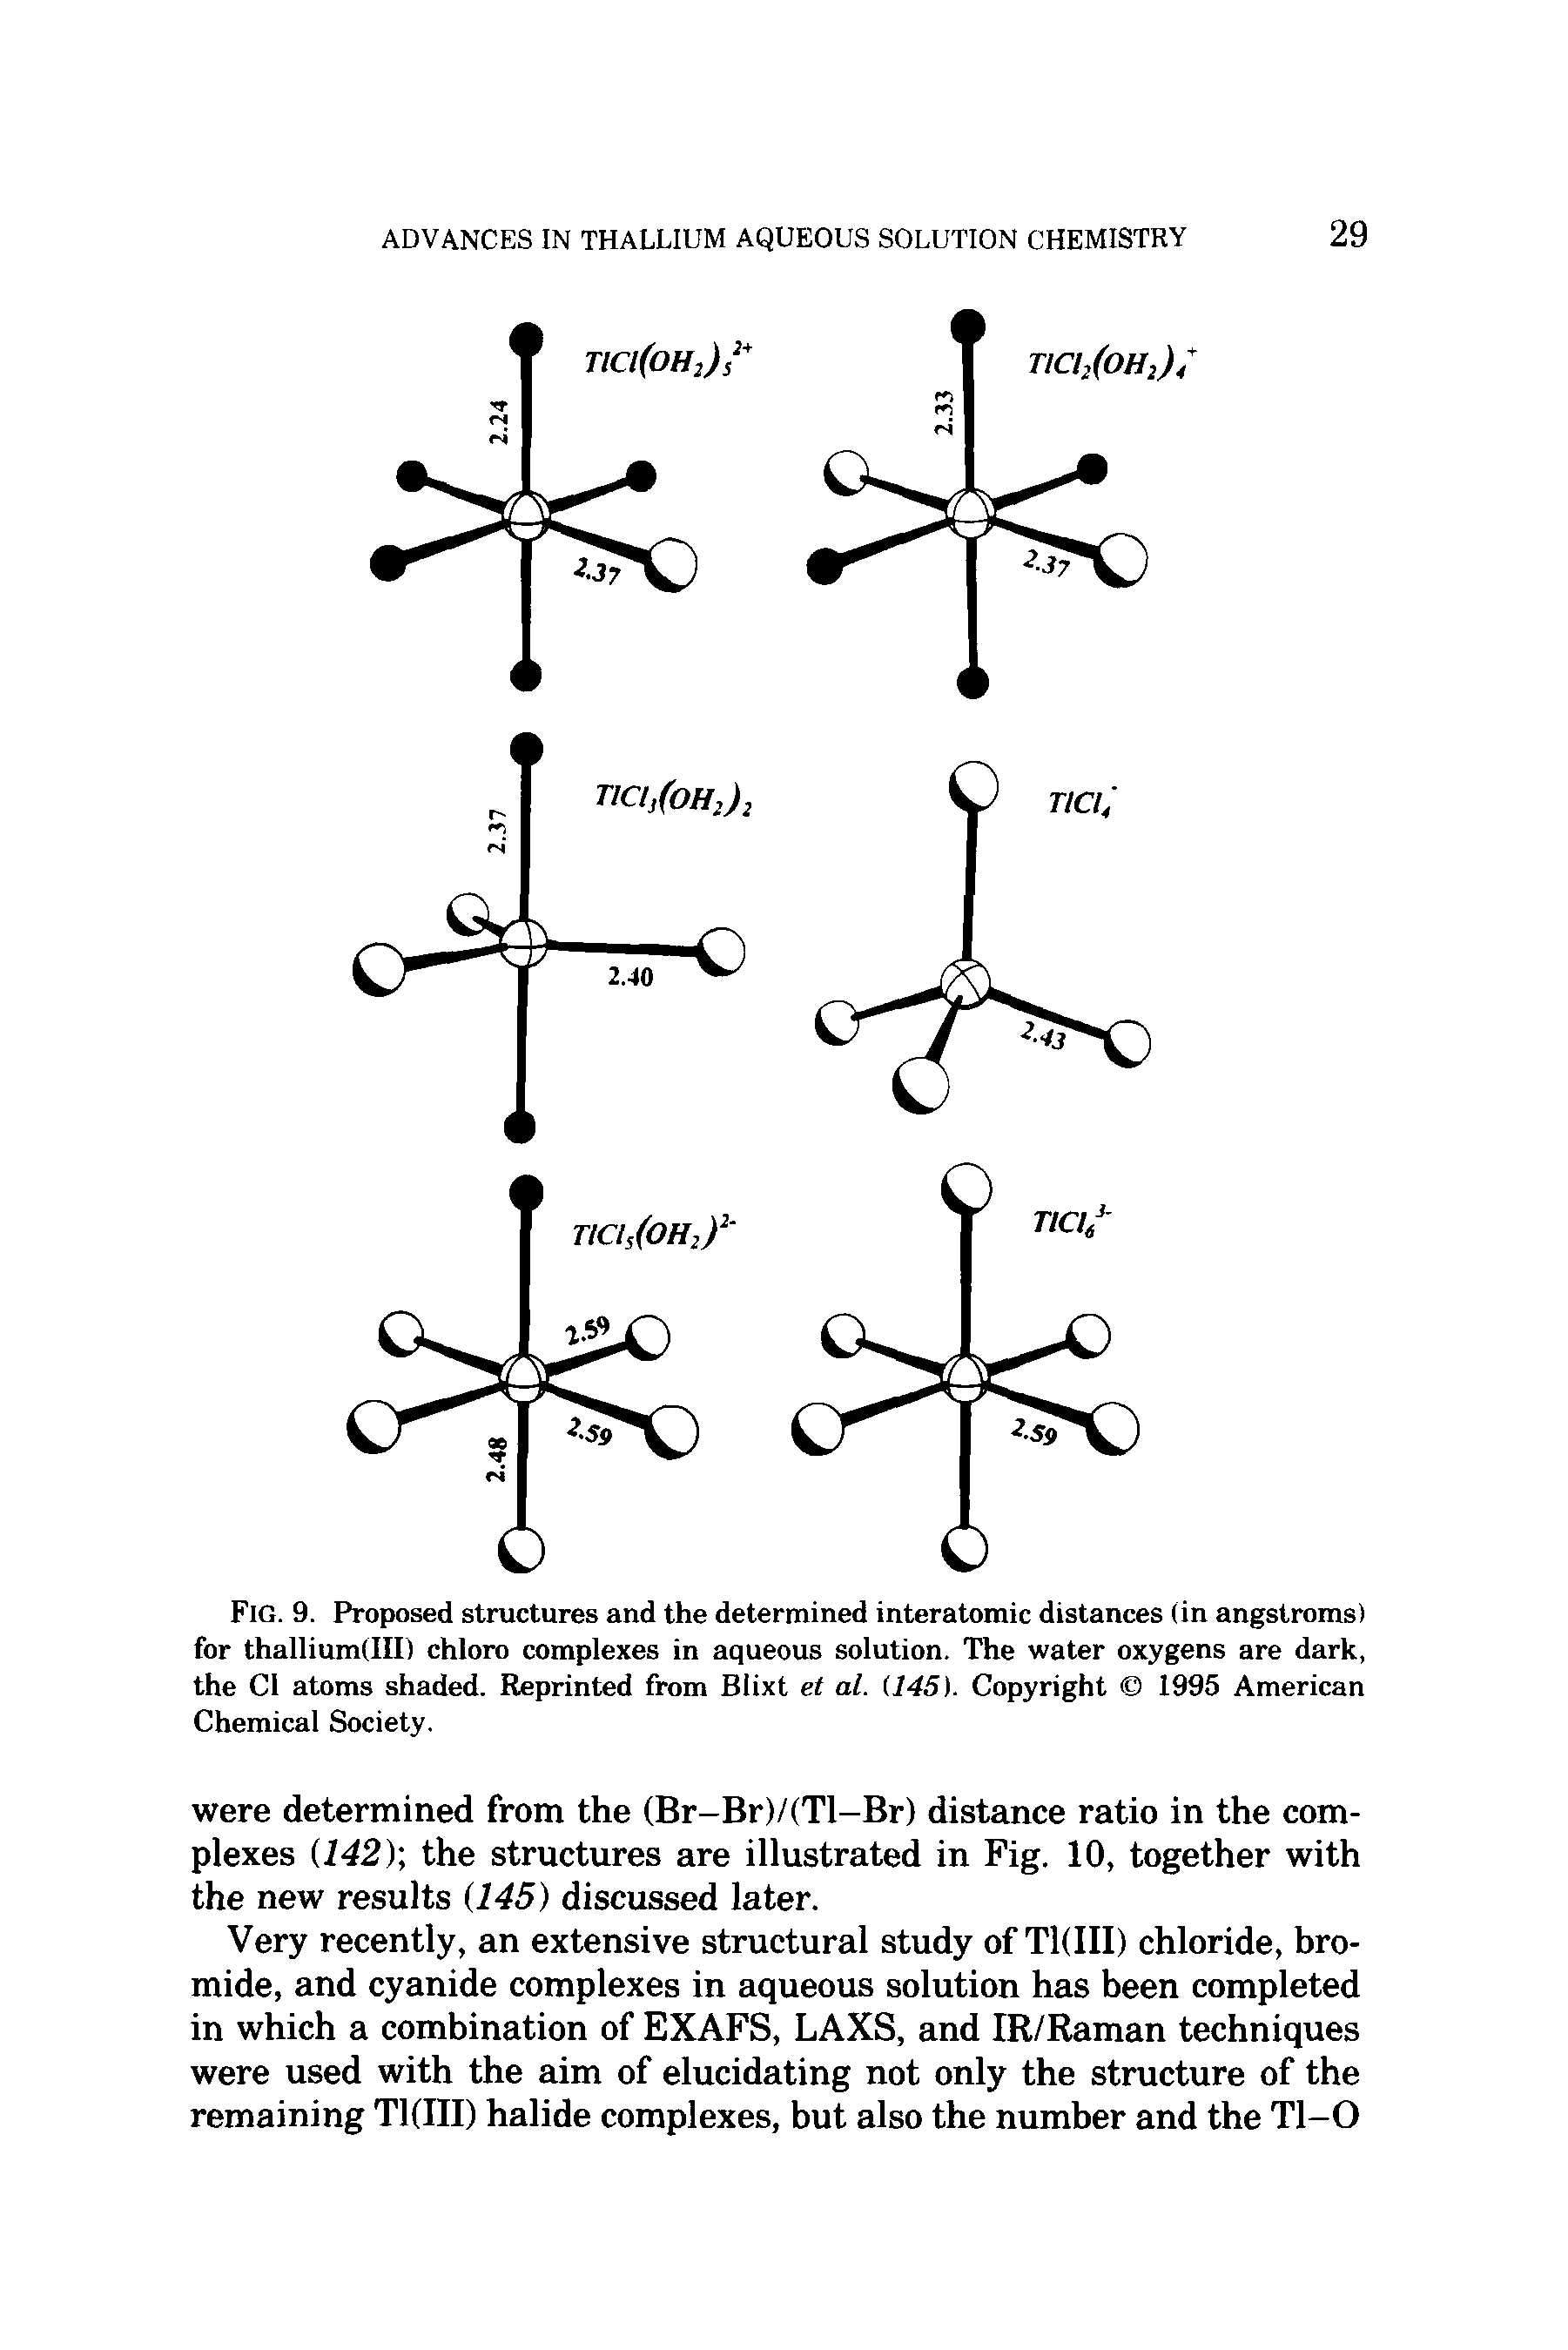 Fig. 9. Proposed structures and the determined interatomic distances (in angstroms) for thallium(IH) chloro complexes in aqueous solution. The water oxygens are dark, the Cl atoms shaded. Reprinted from Blixt et al. (145). Copyright 1995 American Chemical Society.